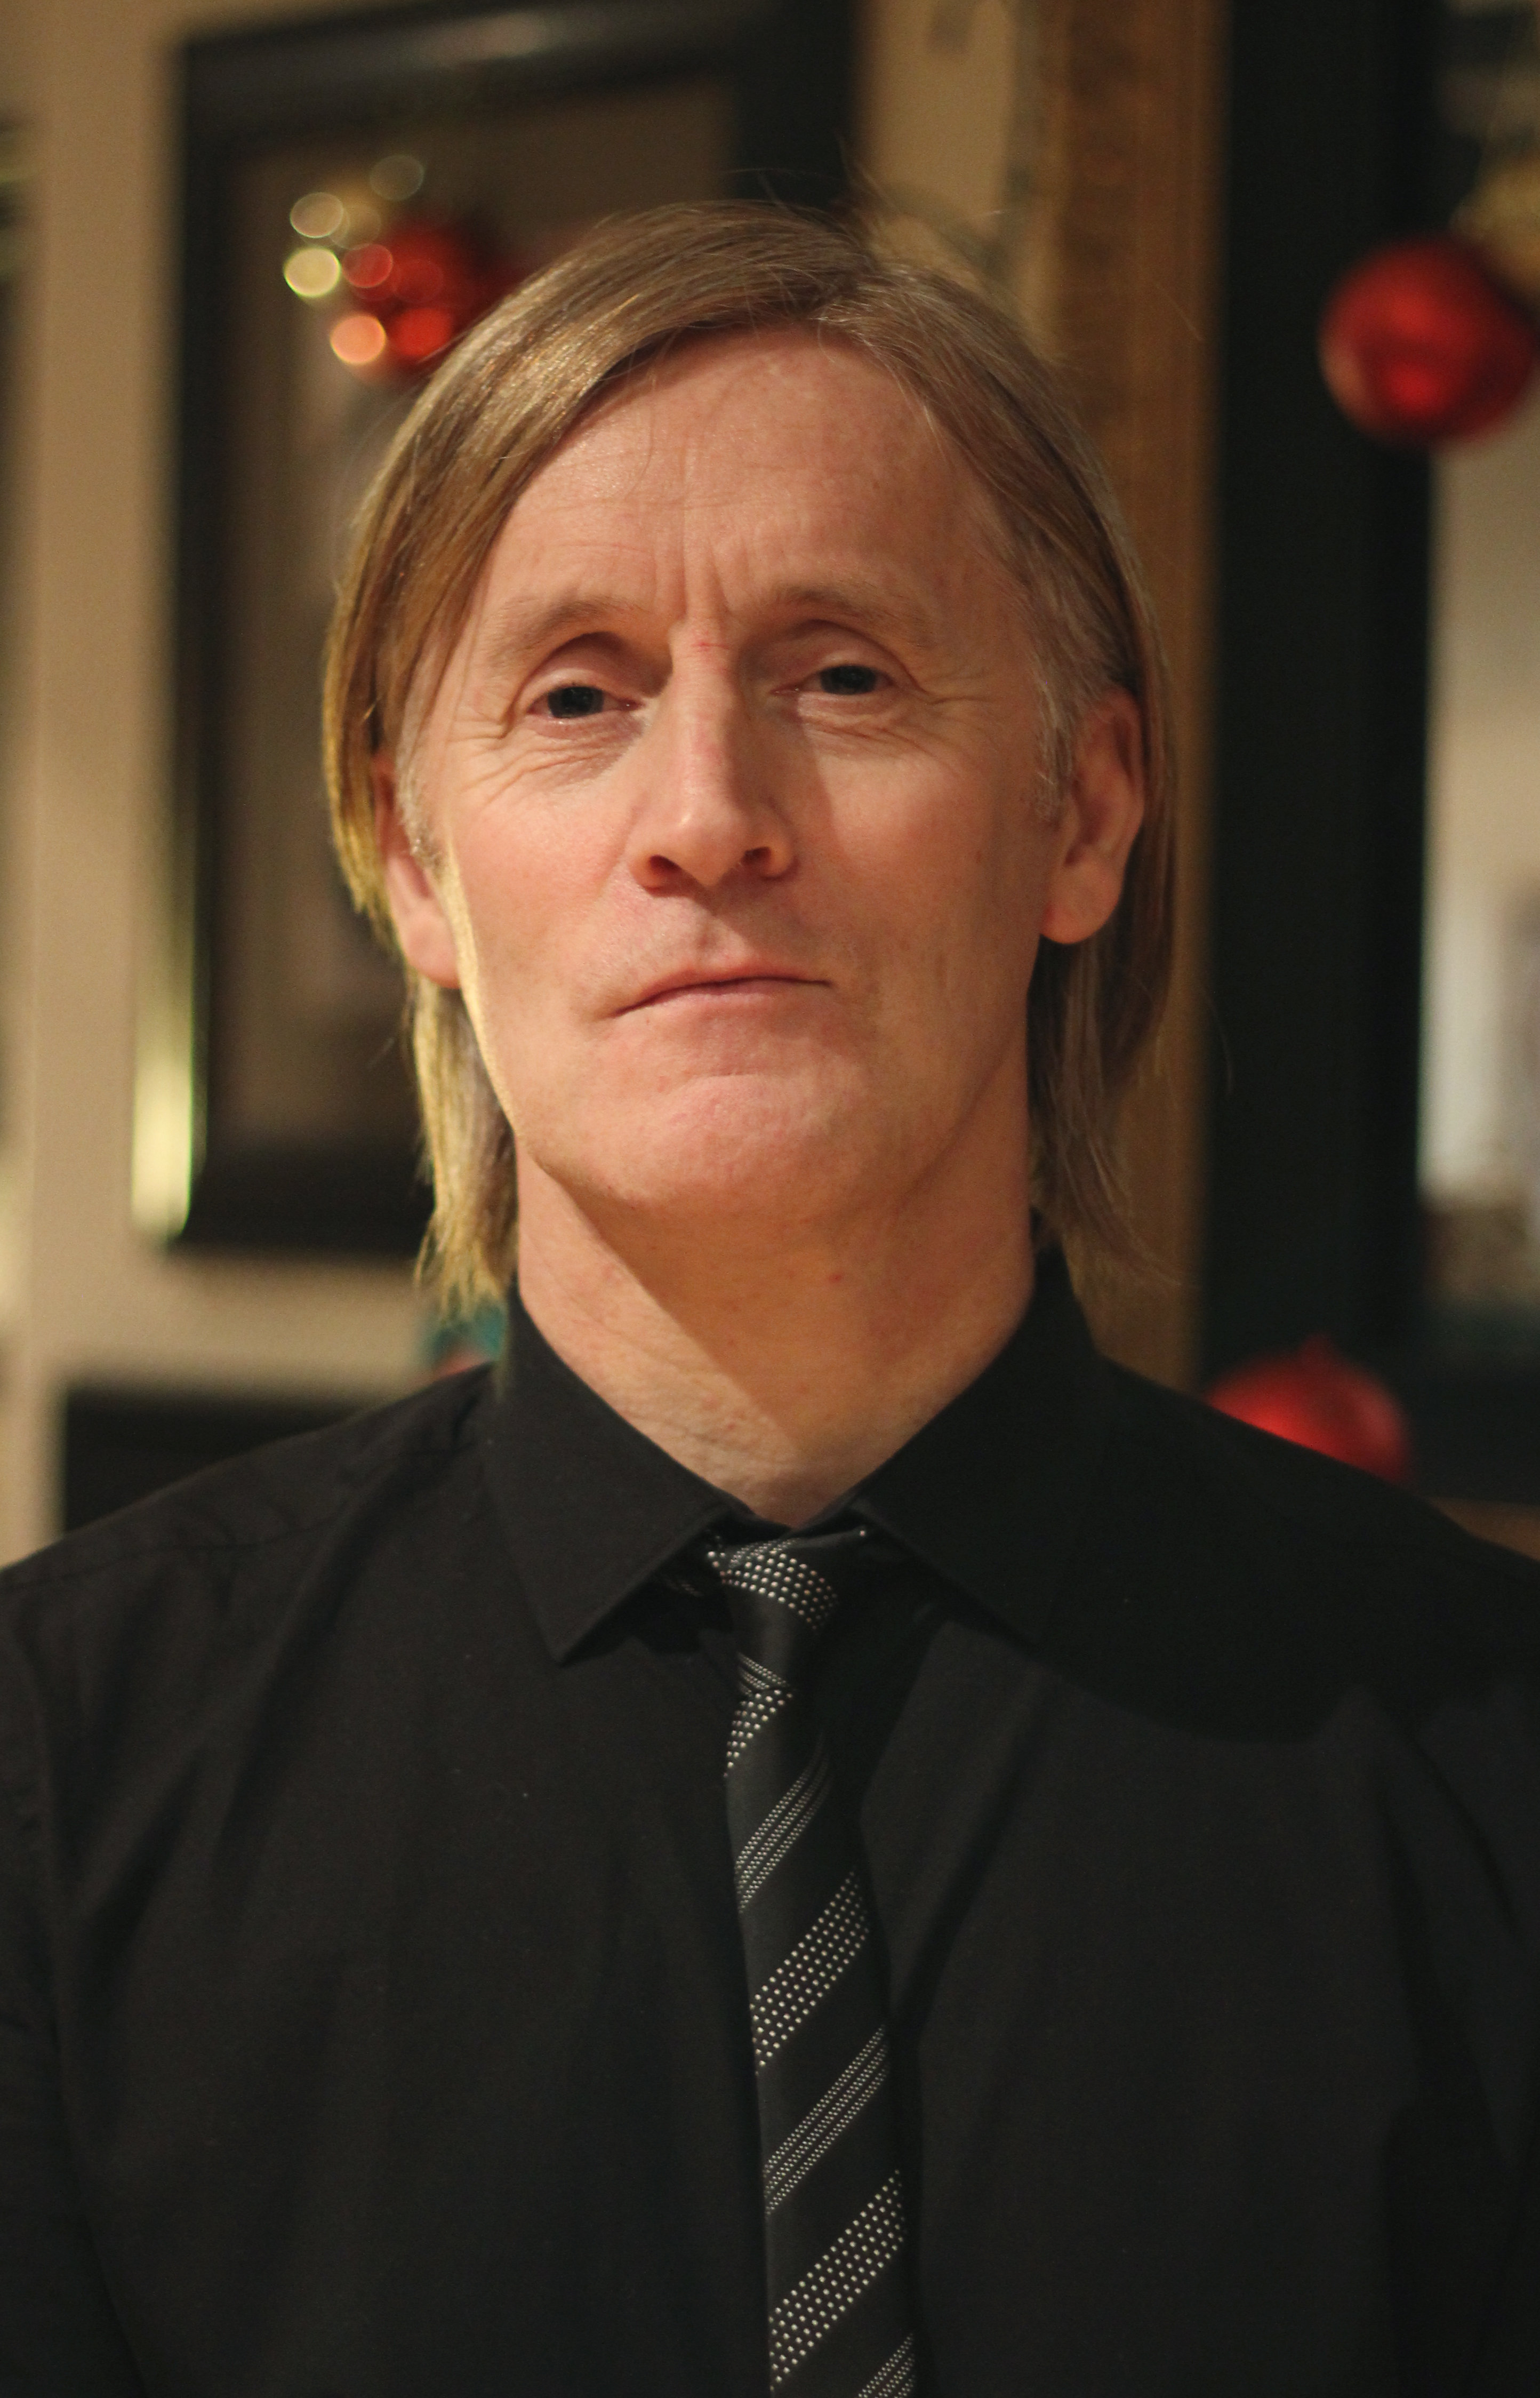 David R. Montgomery as the Restaurant Manager on the set of The Greyness of Autumn